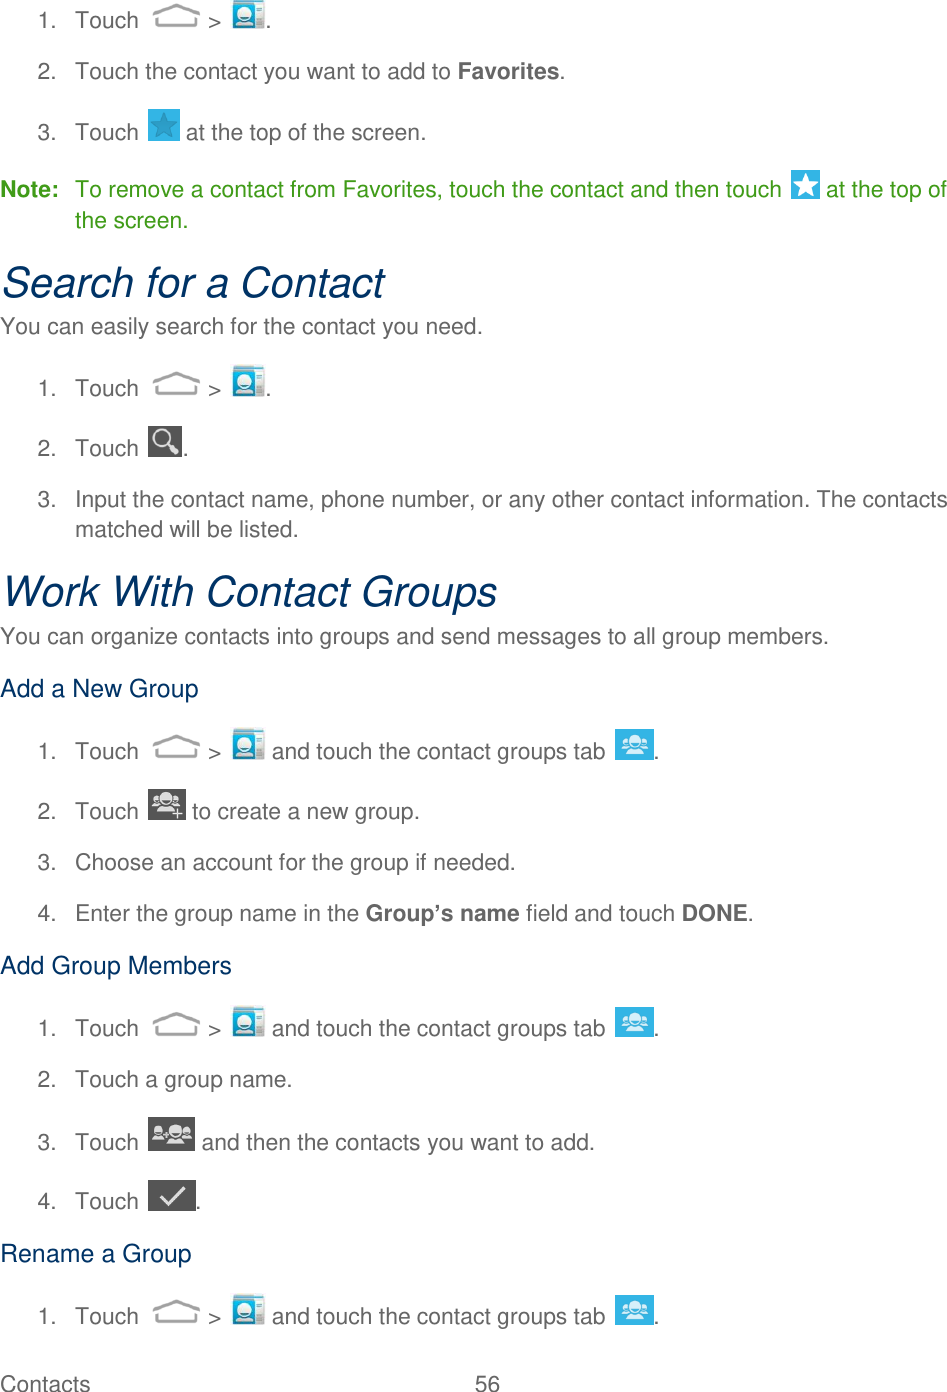 Contacts  56   1.  Touch   &gt;  . 2.  Touch the contact you want to add to Favorites. 3.  Touch   at the top of the screen. Note:  To remove a contact from Favorites, touch the contact and then touch   at the top of the screen. Search for a Contact You can easily search for the contact you need. 1.  Touch   &gt;  . 2.  Touch  . 3.  Input the contact name, phone number, or any other contact information. The contacts matched will be listed. Work With Contact Groups You can organize contacts into groups and send messages to all group members. Add a New Group 1.  Touch   &gt;   and touch the contact groups tab  . 2.  Touch   to create a new group. 3.  Choose an account for the group if needed. 4.  Enter the group name in the Group’s name field and touch DONE. Add Group Members 1.  Touch   &gt;   and touch the contact groups tab  . 2.  Touch a group name. 3.  Touch   and then the contacts you want to add. 4.  Touch  . Rename a Group 1.  Touch   &gt;   and touch the contact groups tab  . 